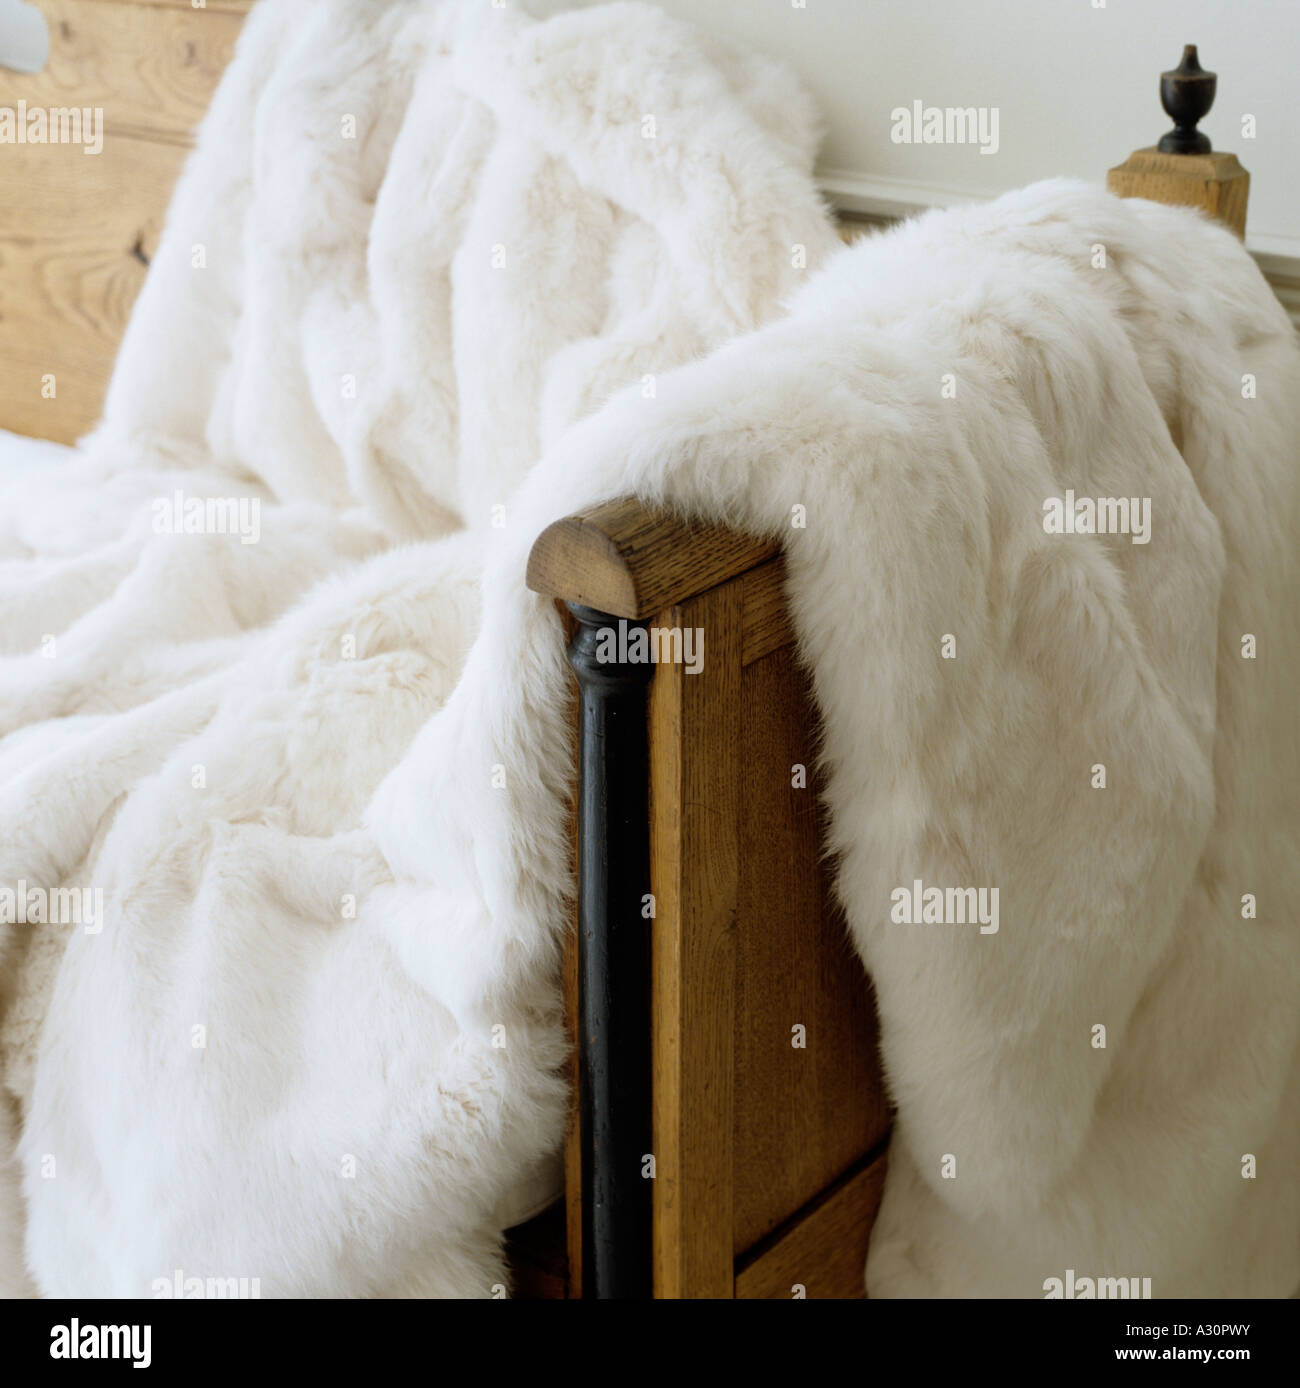 White fur throw draped over arm of wooden bench Stock Photo